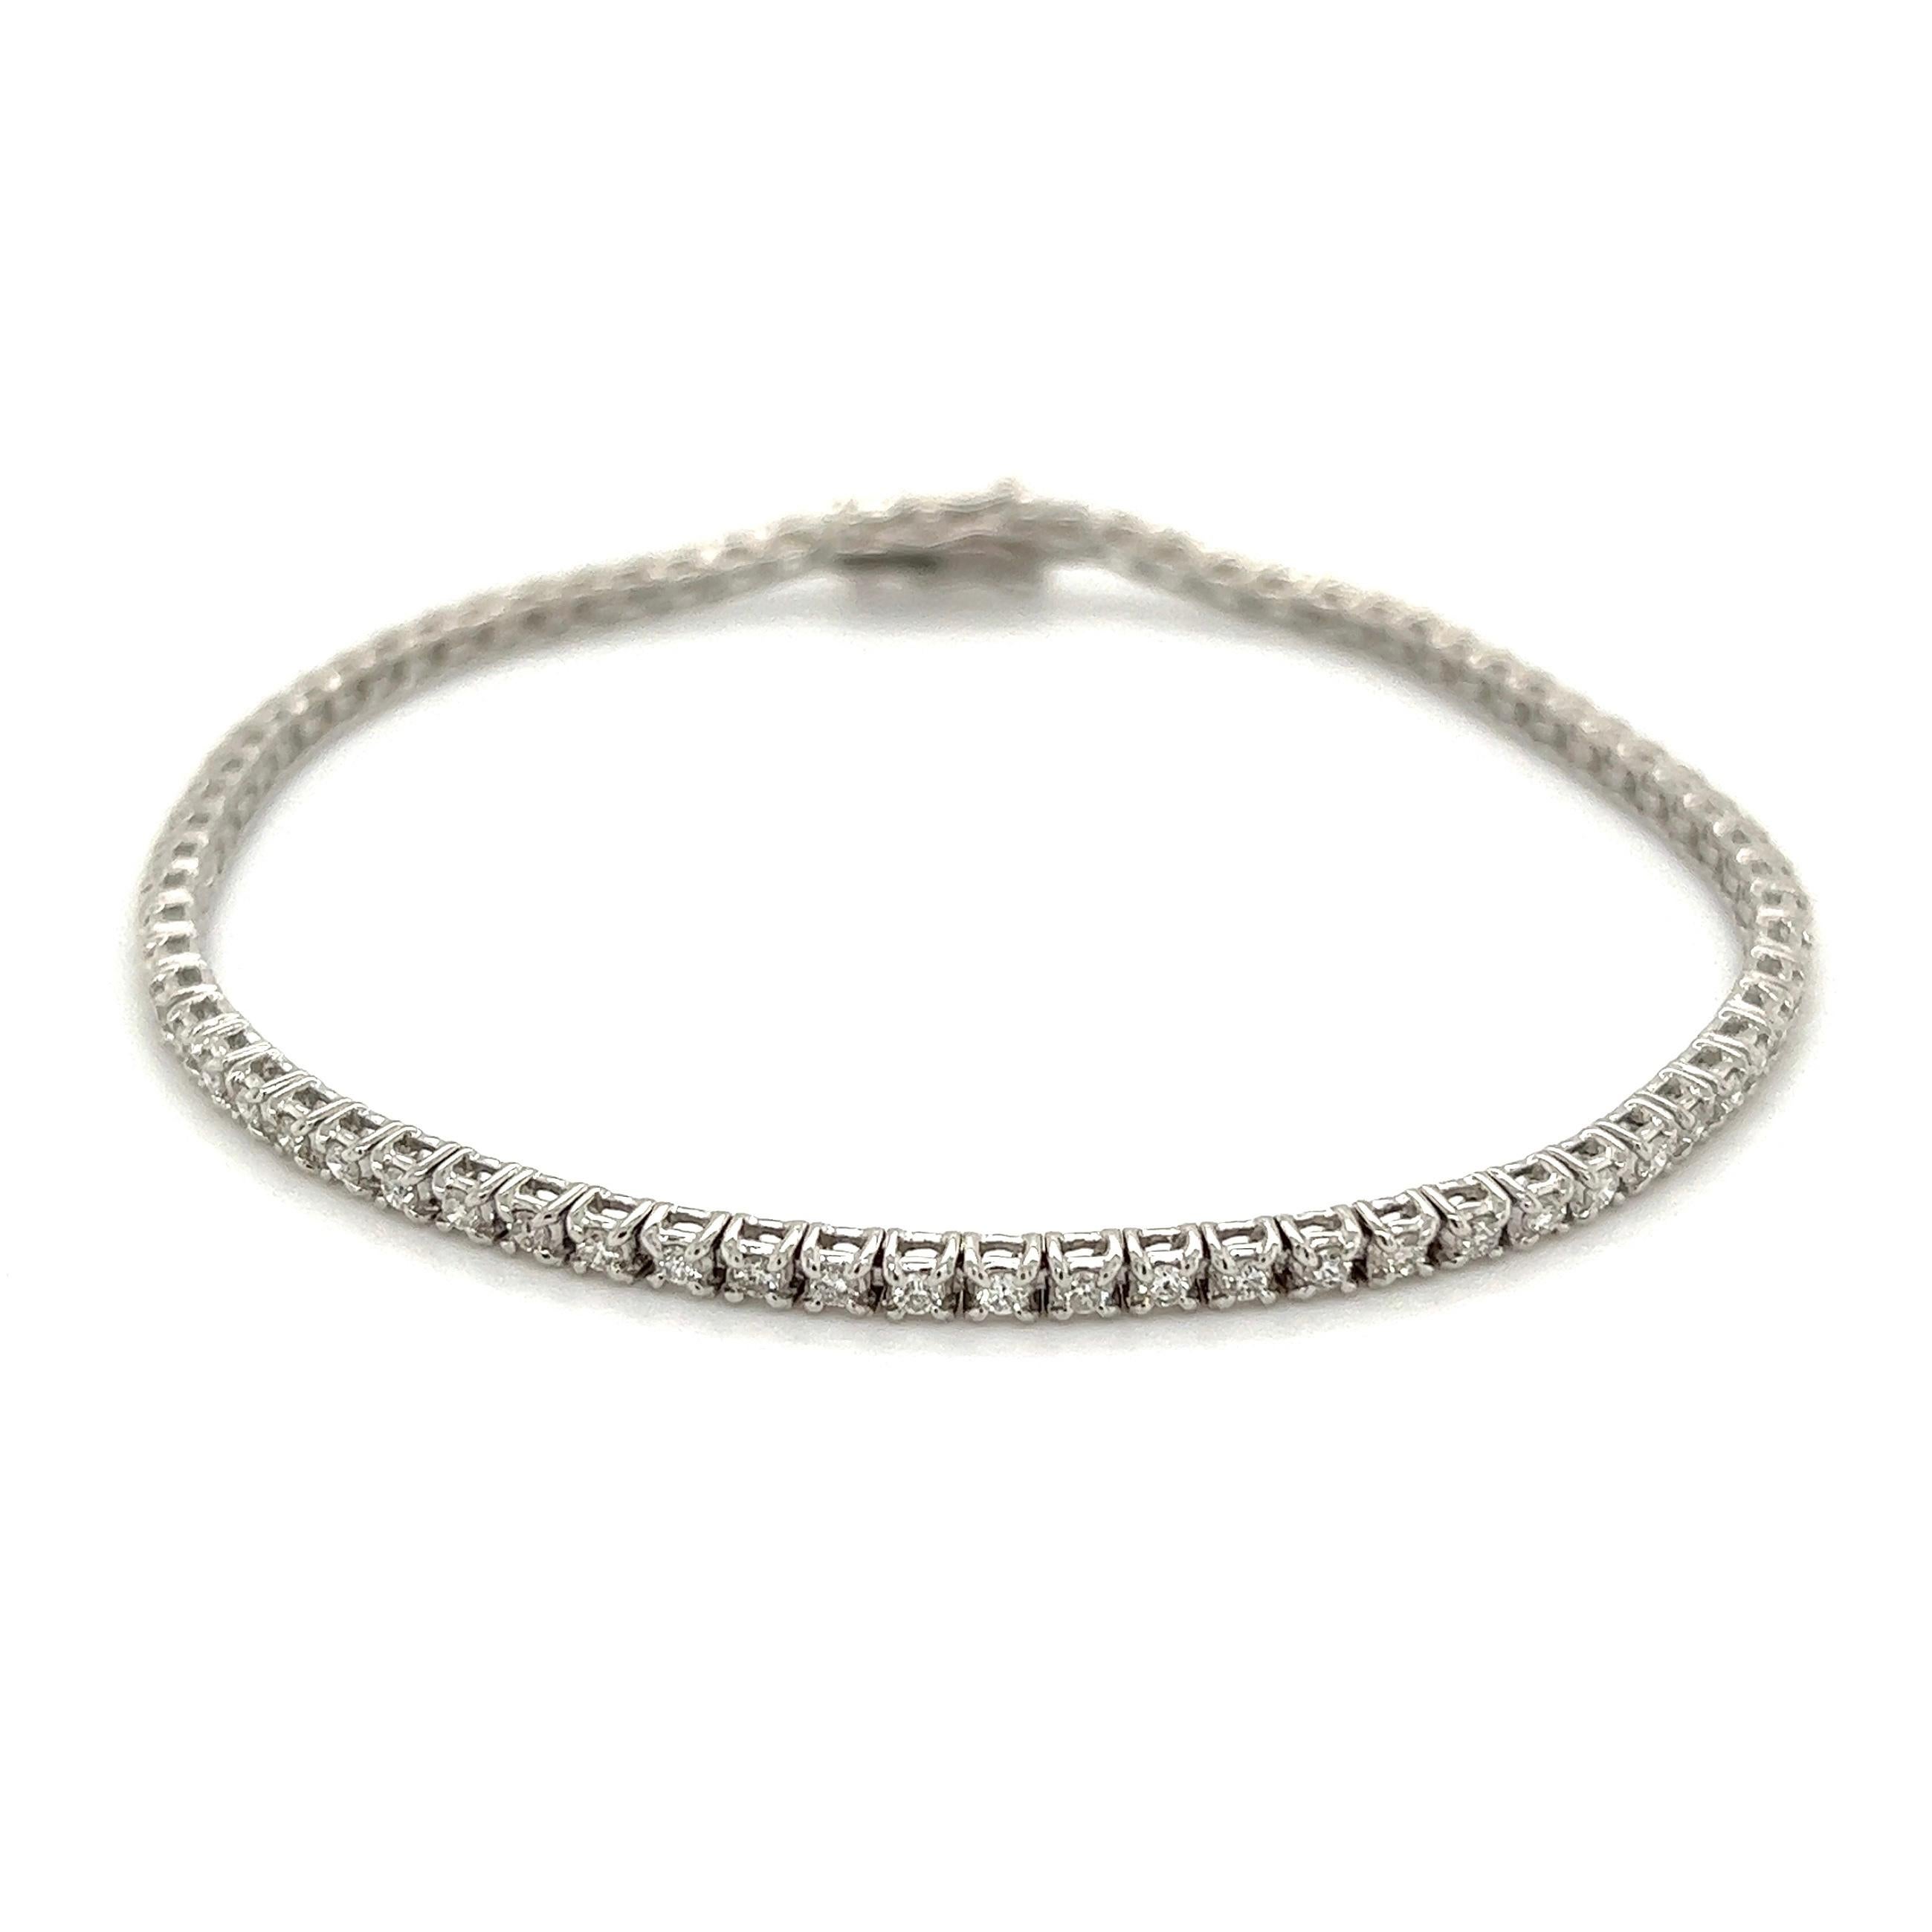 Simply Beautiful! Diamond 18K White Gold Line Tennis Bracelet. Hand set with Round Brilliant-Cut Diamonds, weighing approx. 1.00tcw. Measuring approx. 7” l x 0.09” w. Hand set and Hand crafted in 18K White Gold. Chic and Classic and so easy to